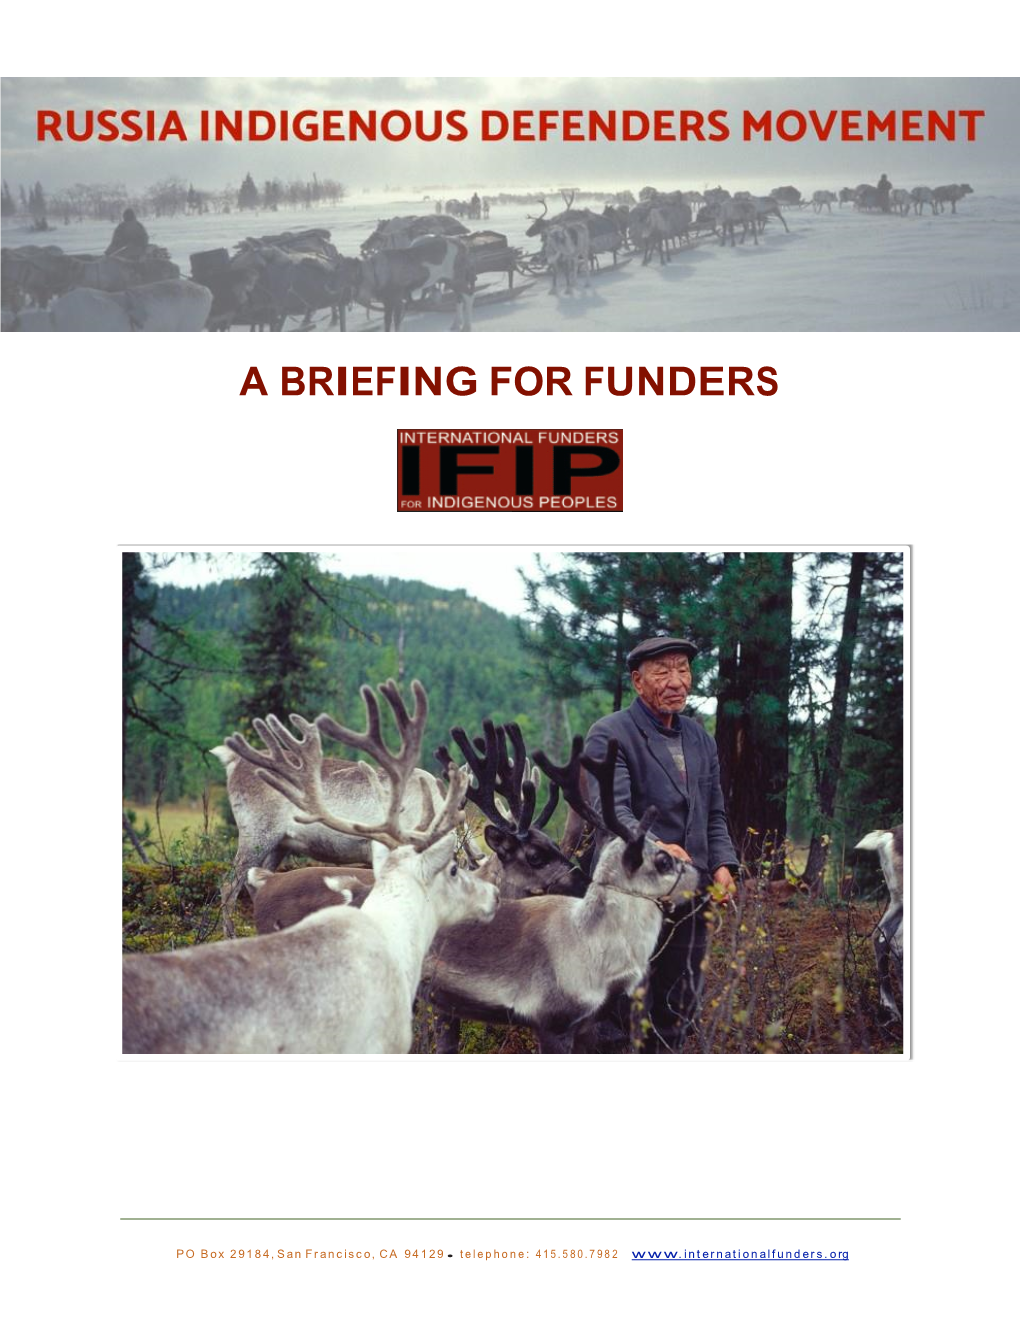 A Briefing for Funders